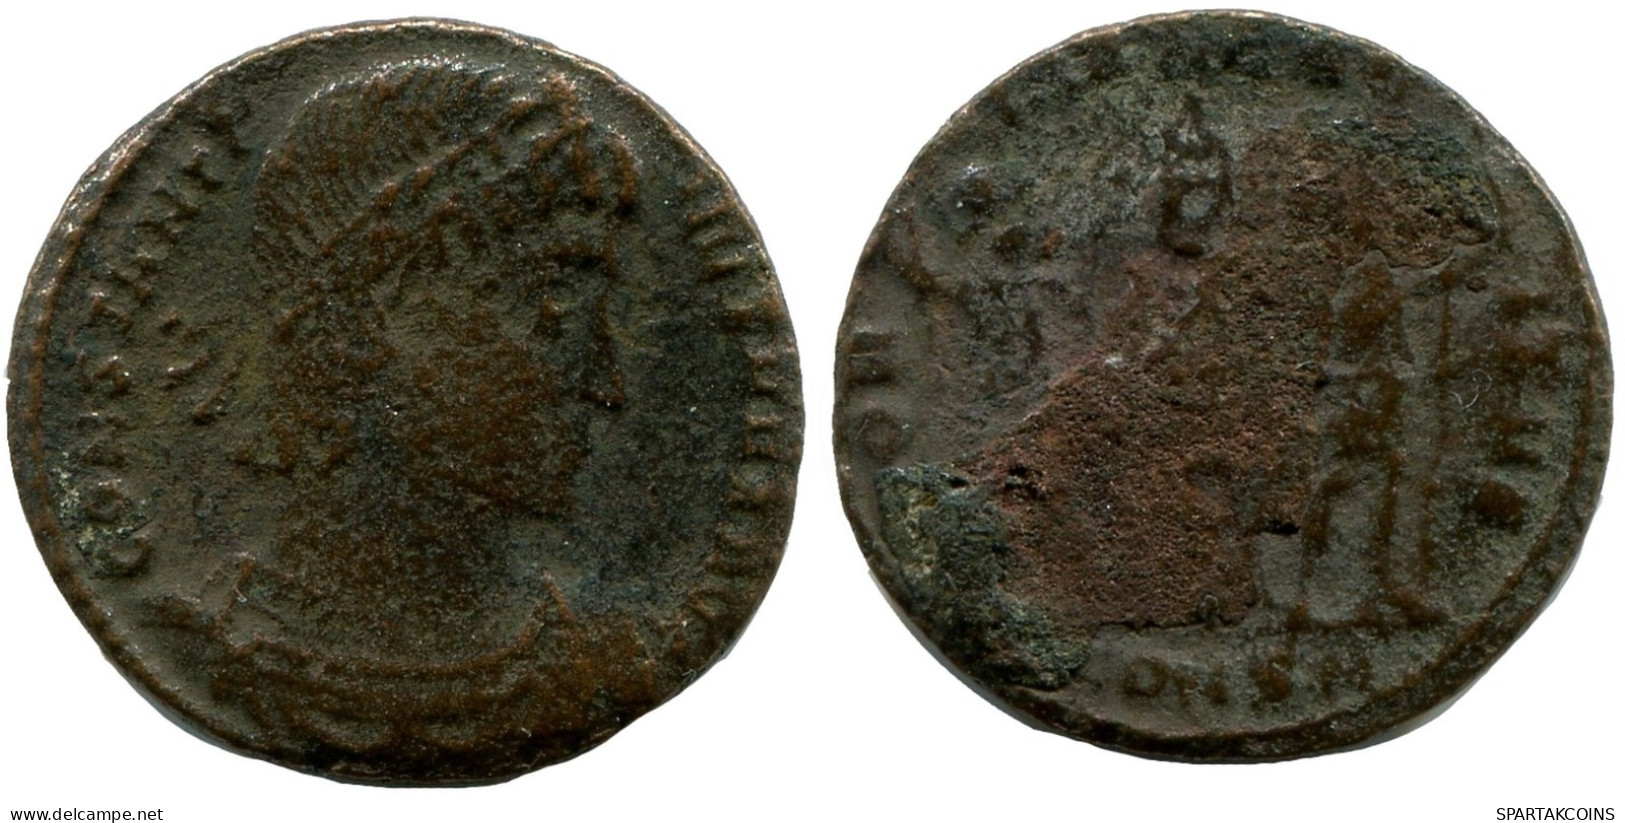 CONSTANTINE I MINTED IN CONSTANTINOPLE FOUND IN IHNASYAH HOARD #ANC10752.14.D.A - L'Empire Chrétien (307 à 363)